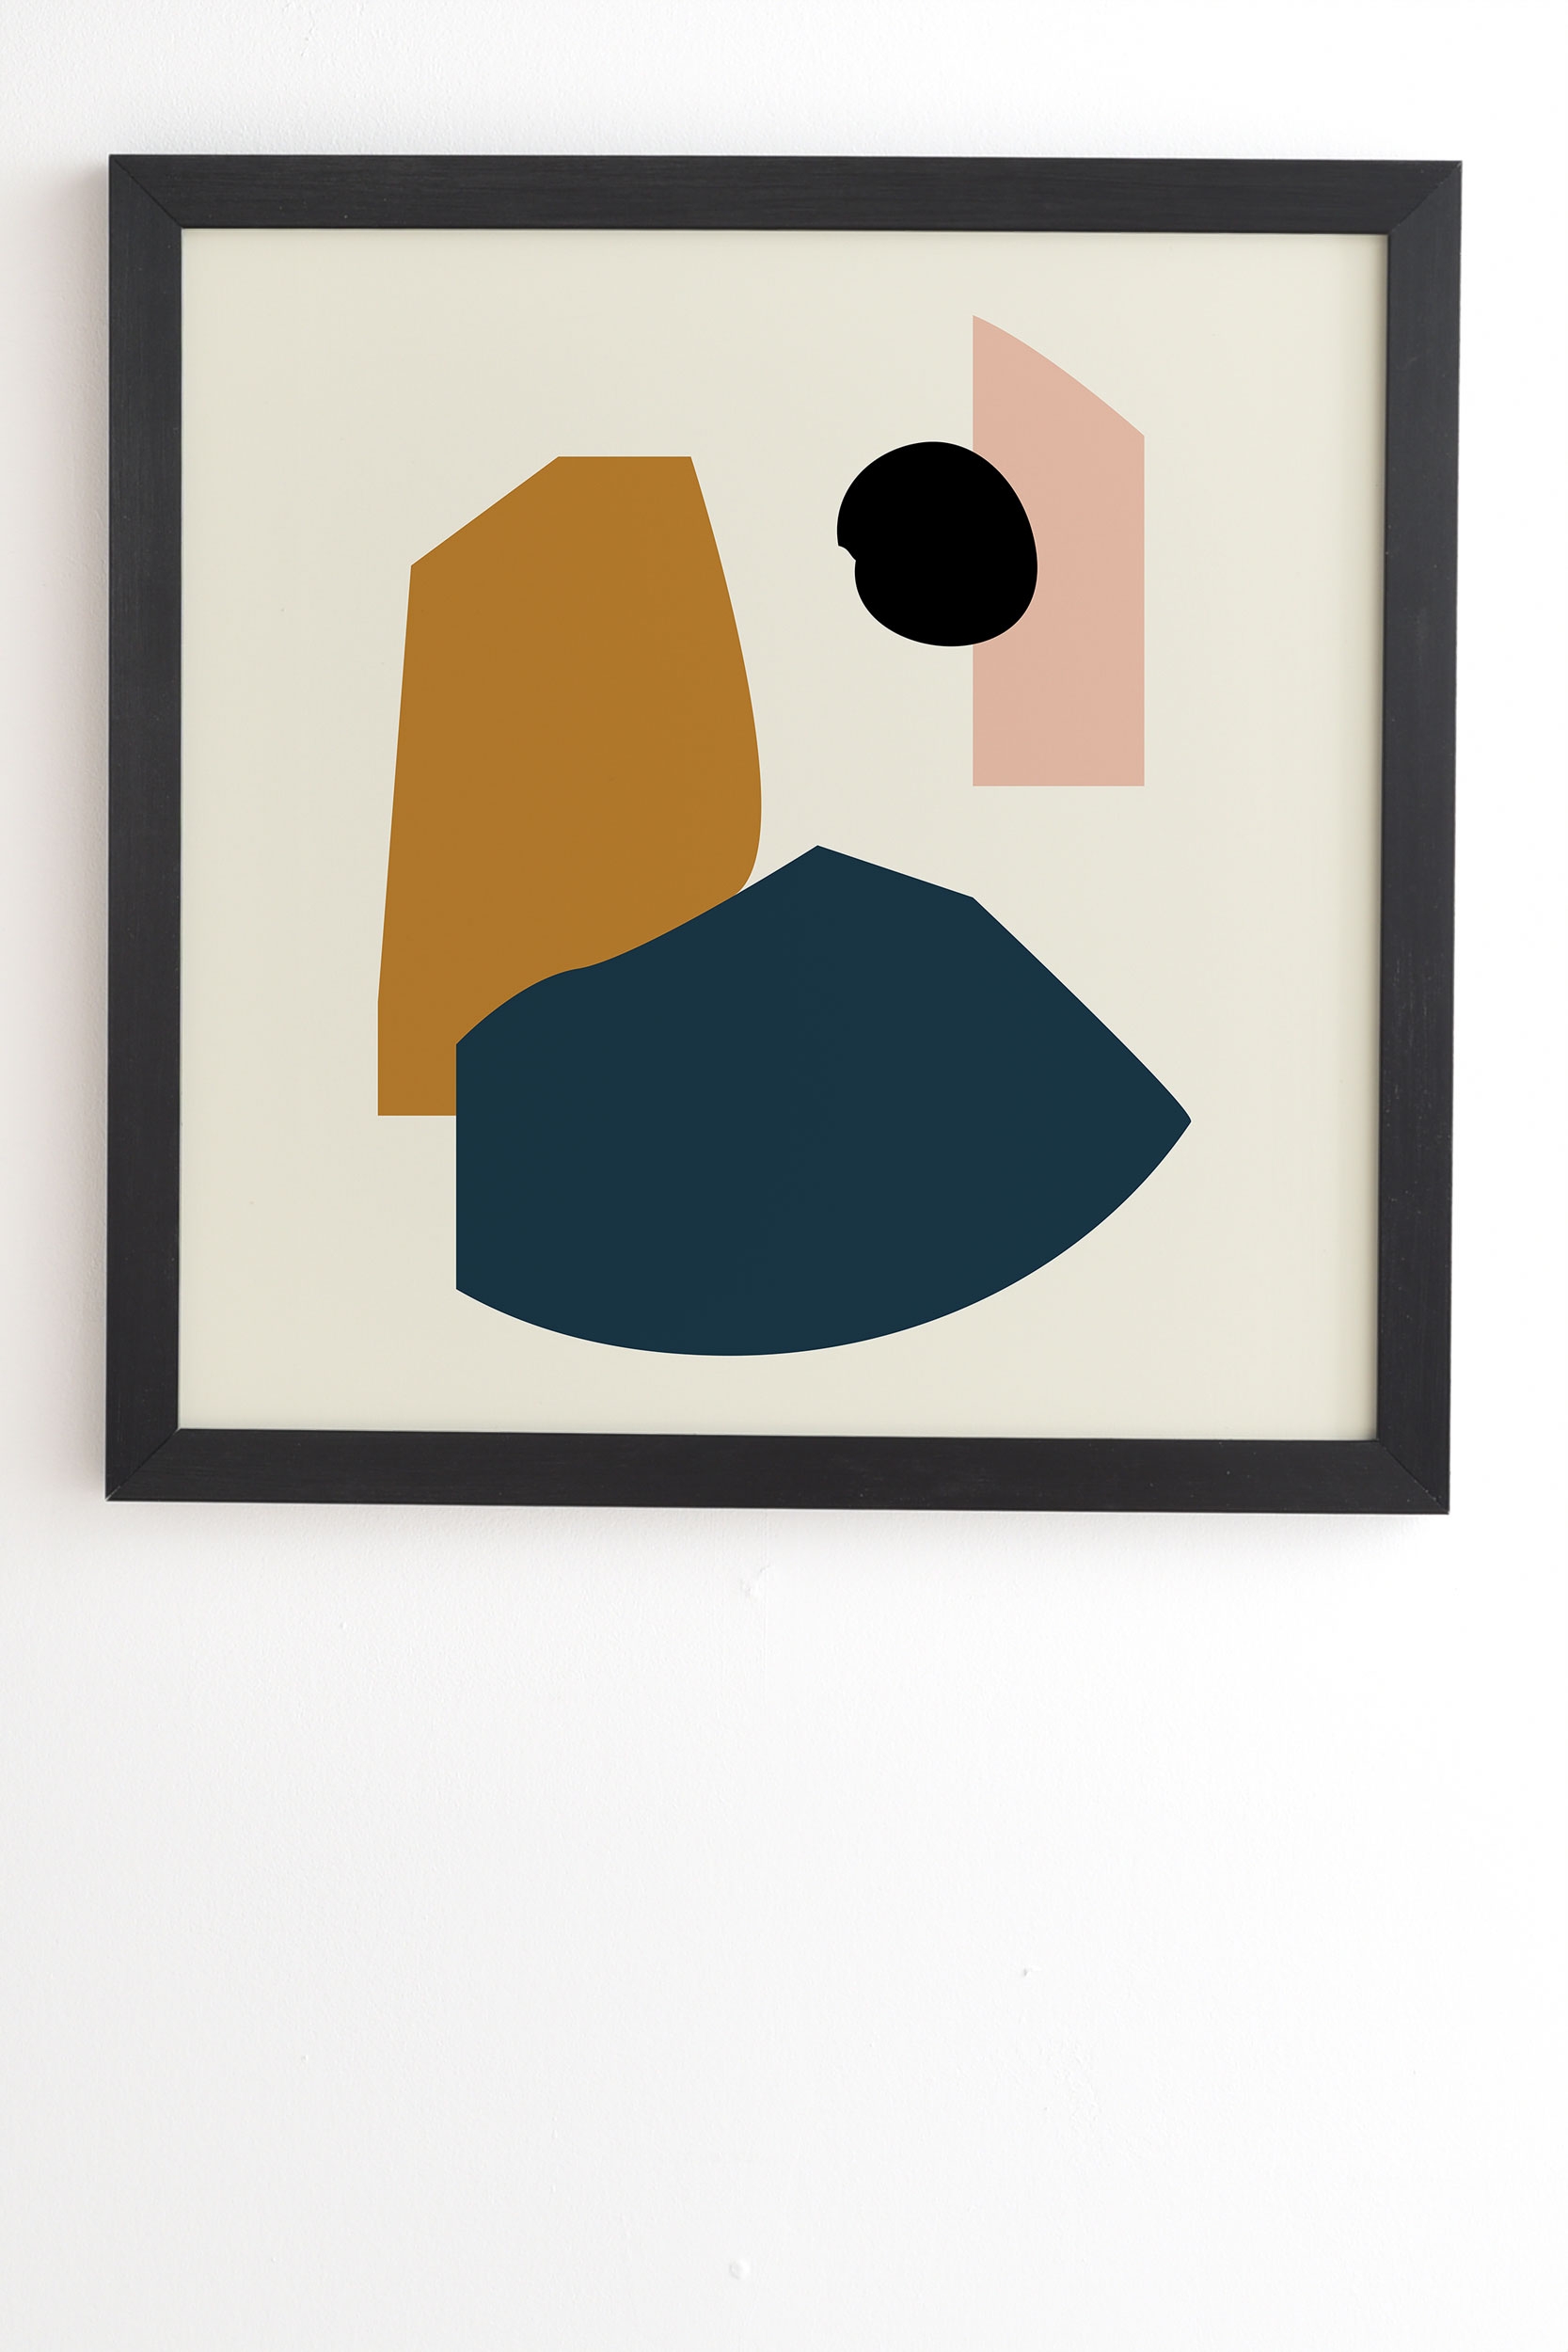 Shape Study 1 Lola Collection by mpgmb - Framed Wall Art Basic Black 11" x 13" - Image 1